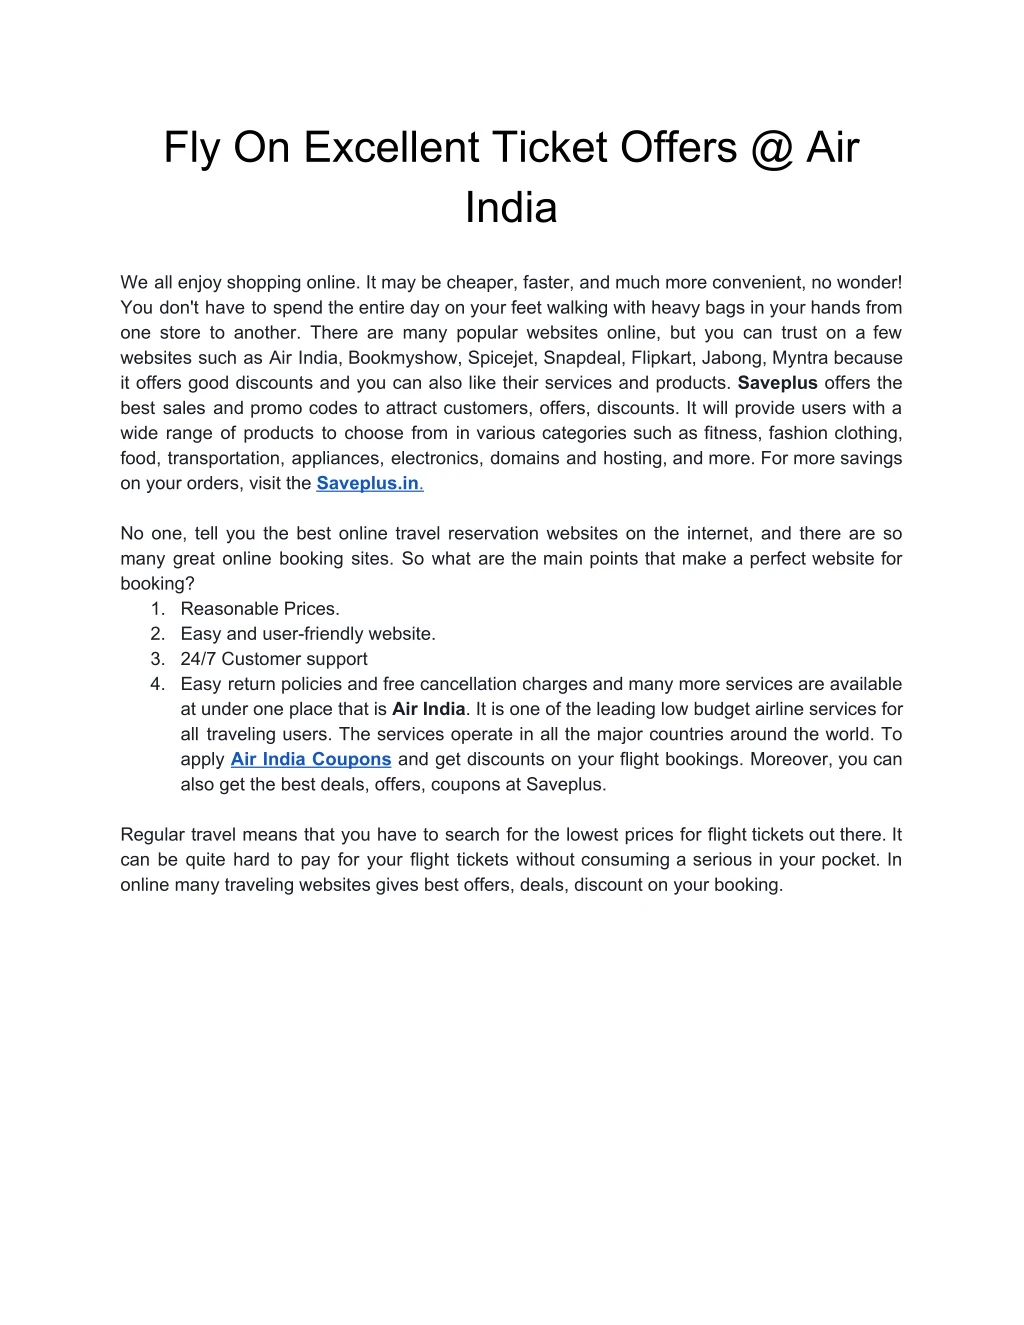 fly on excellent ticket offers @ air india n.